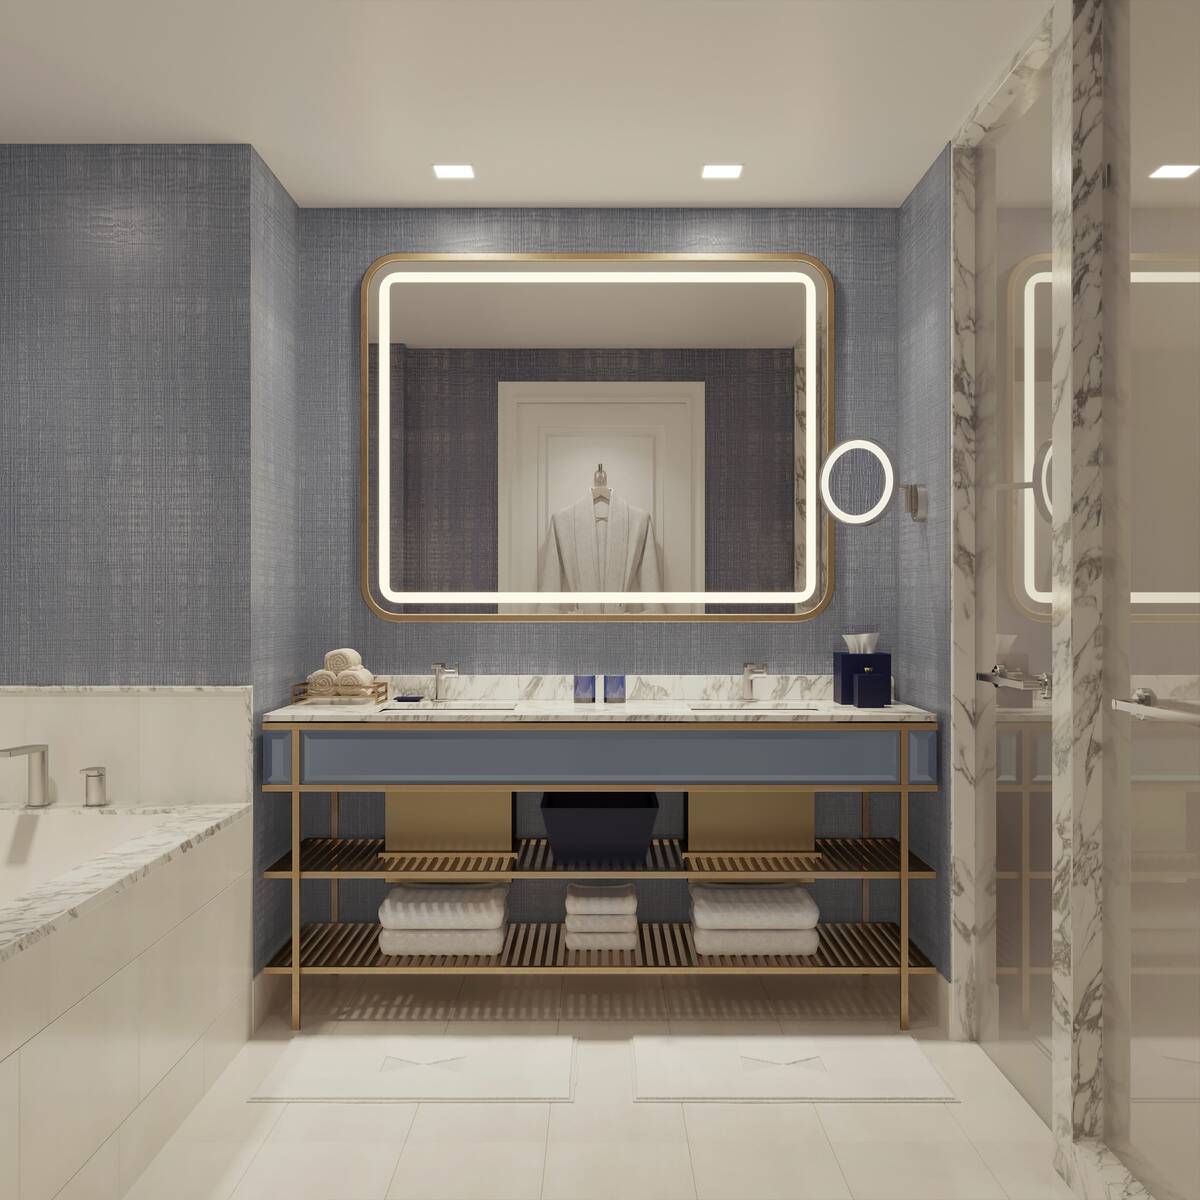 A rendering of a king suite bathroom in the Fontainebleau Las Vegas. (Fontainebleau Development)